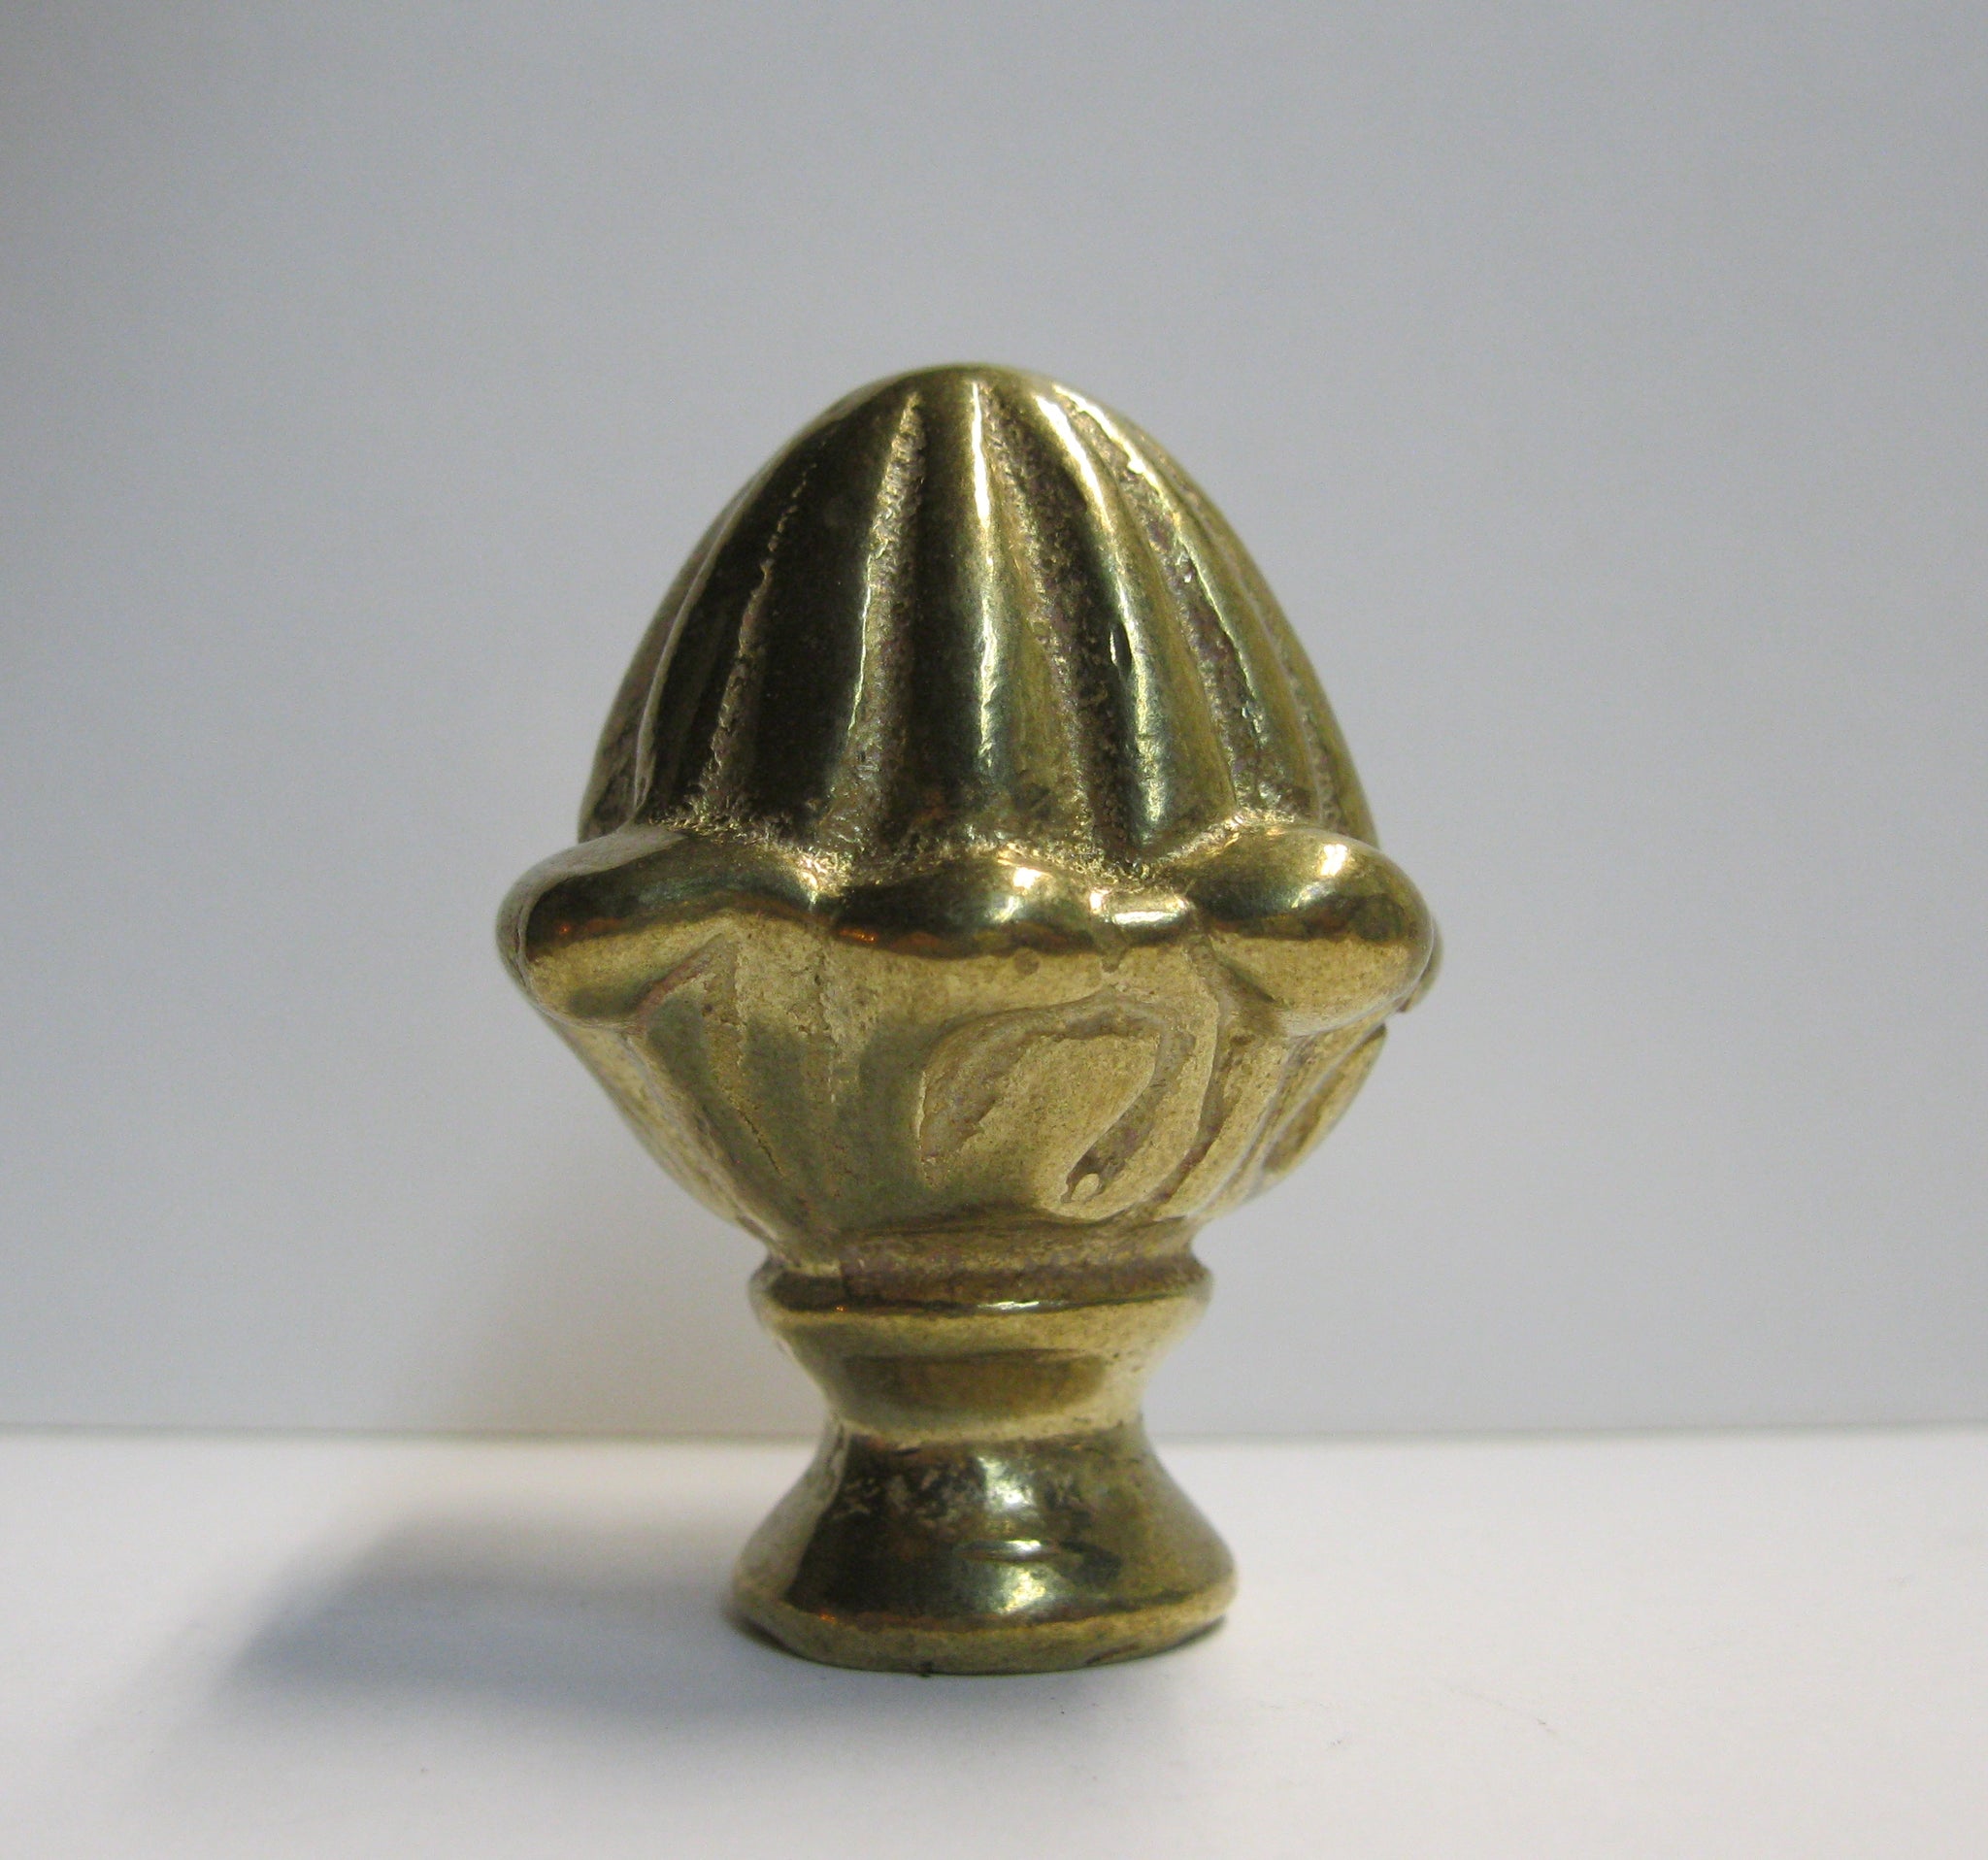 24019-41, 1 Pack Steel Lamp Finial in Antique Brass Finish, 1 1/4